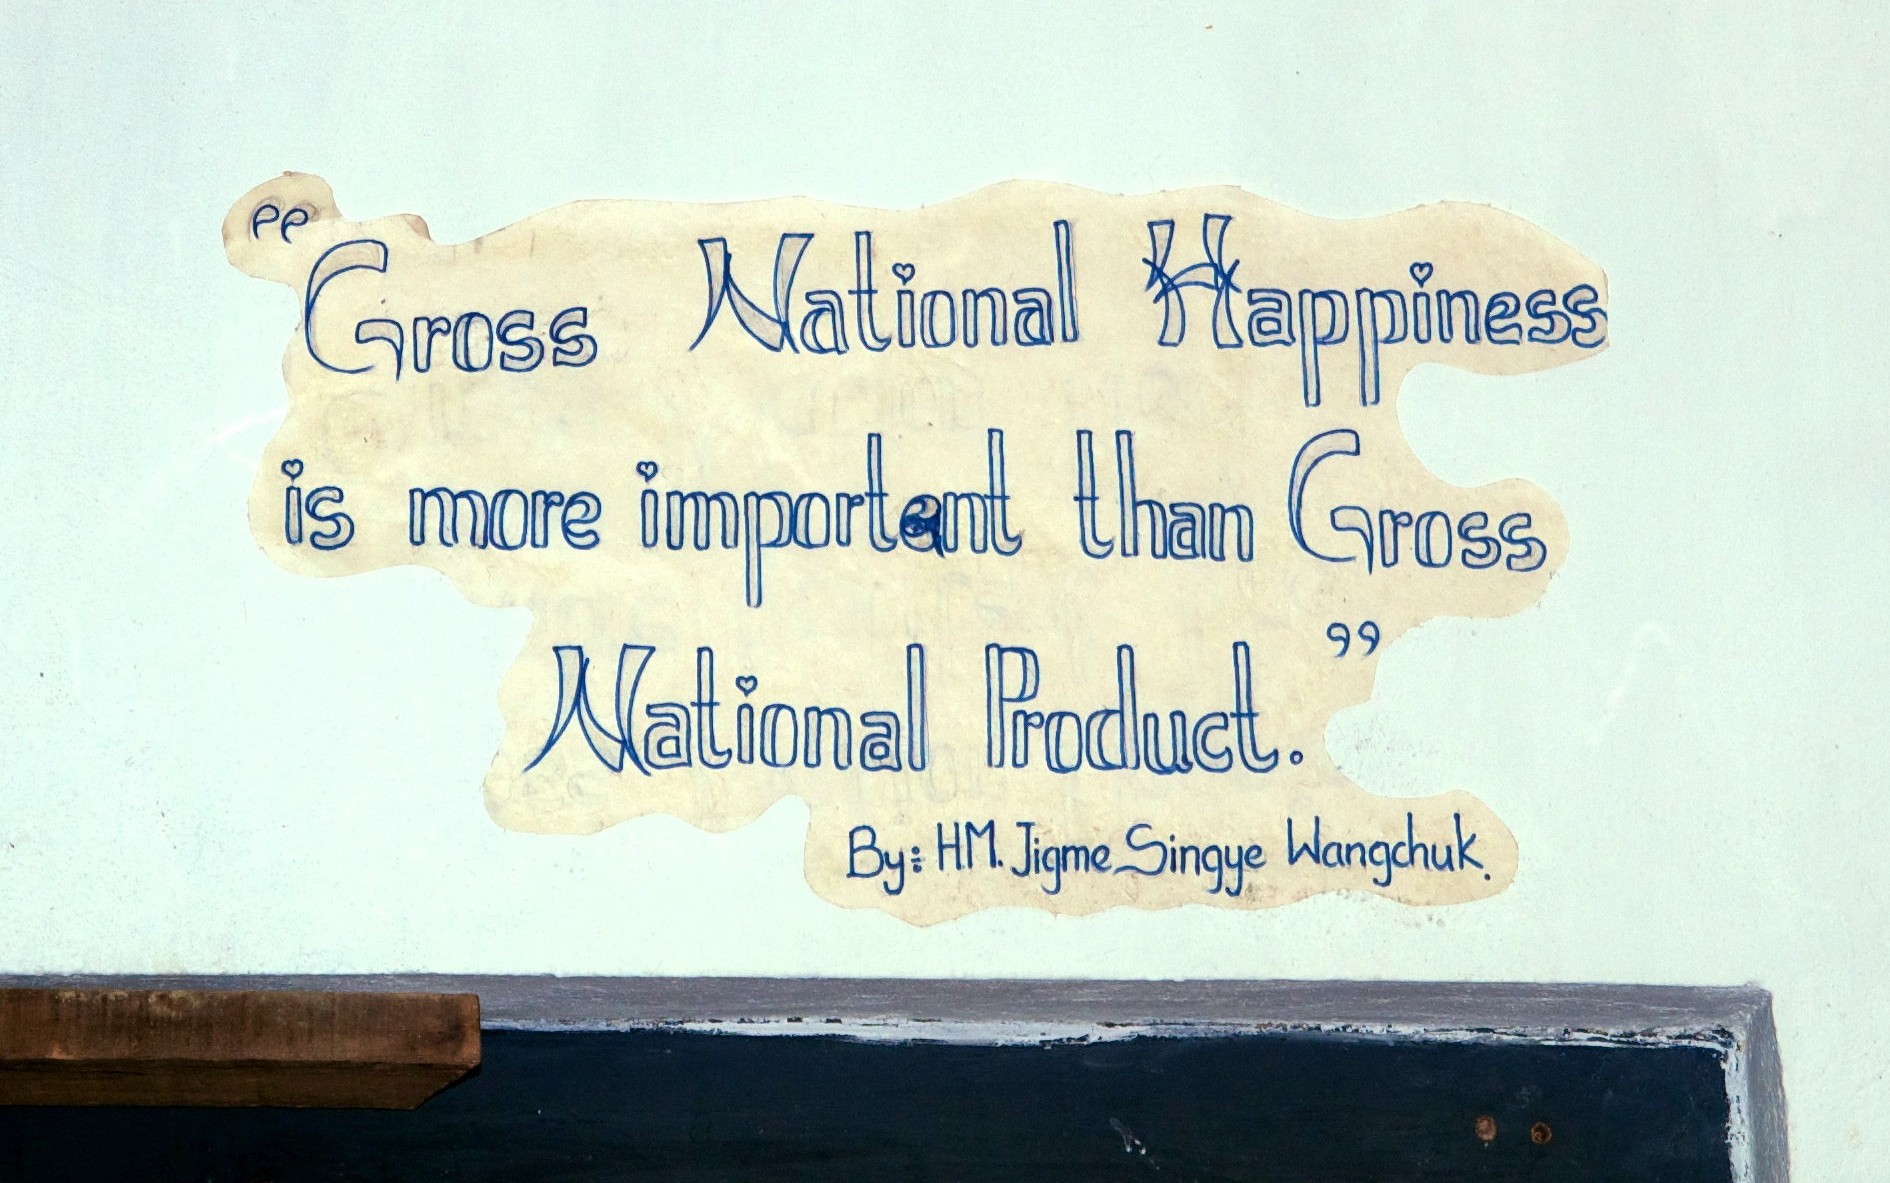 Slogen saying Gross National Happiness is more important than Grosss National Product